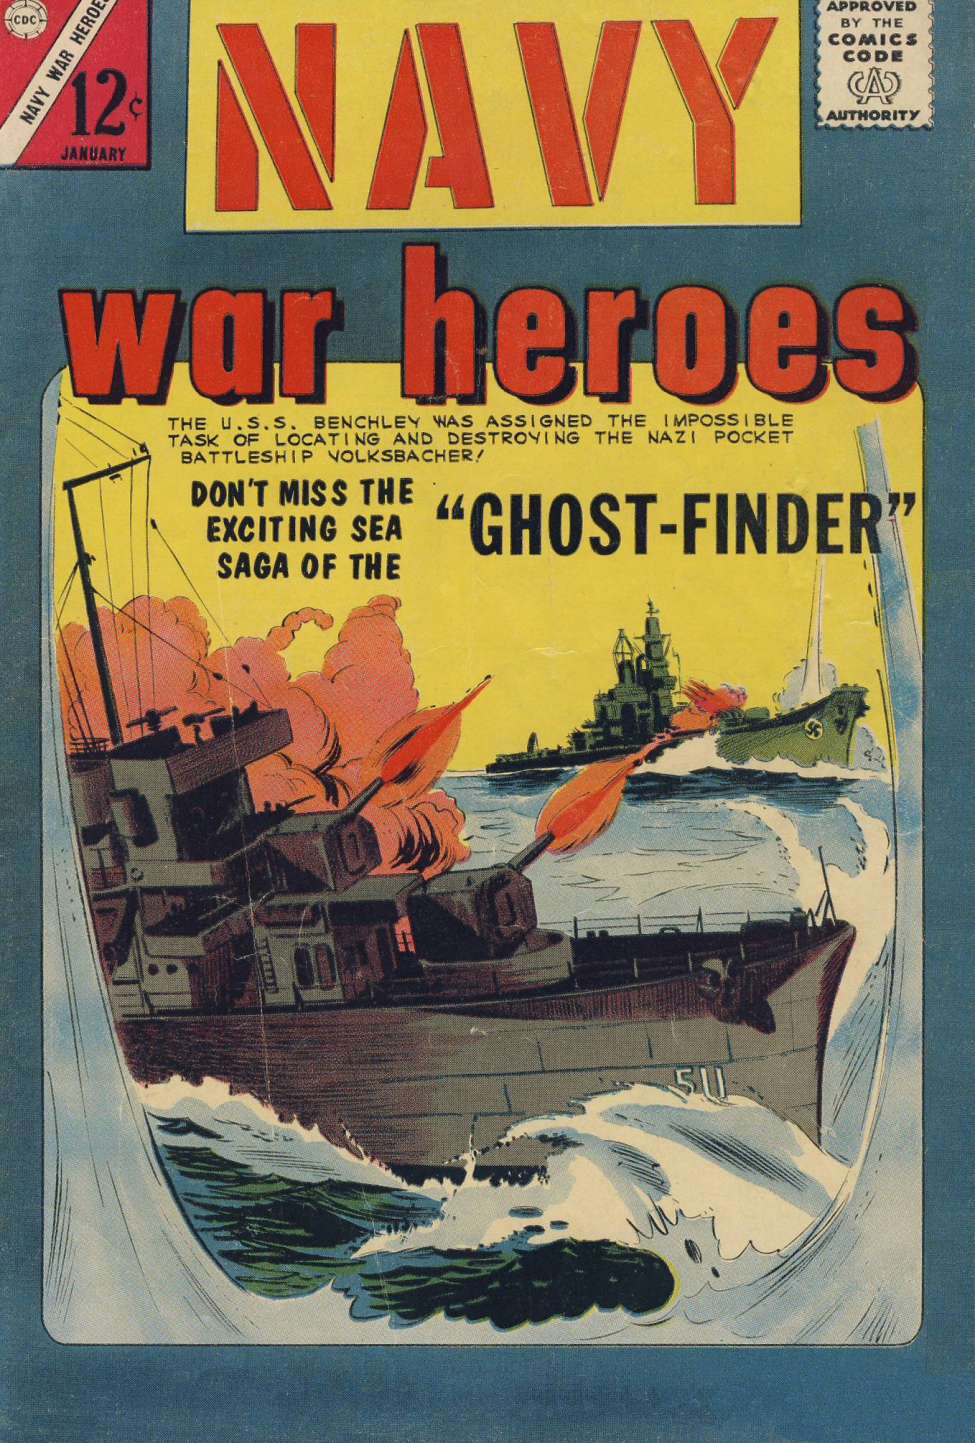 Book Cover For Navy War Heroes 6